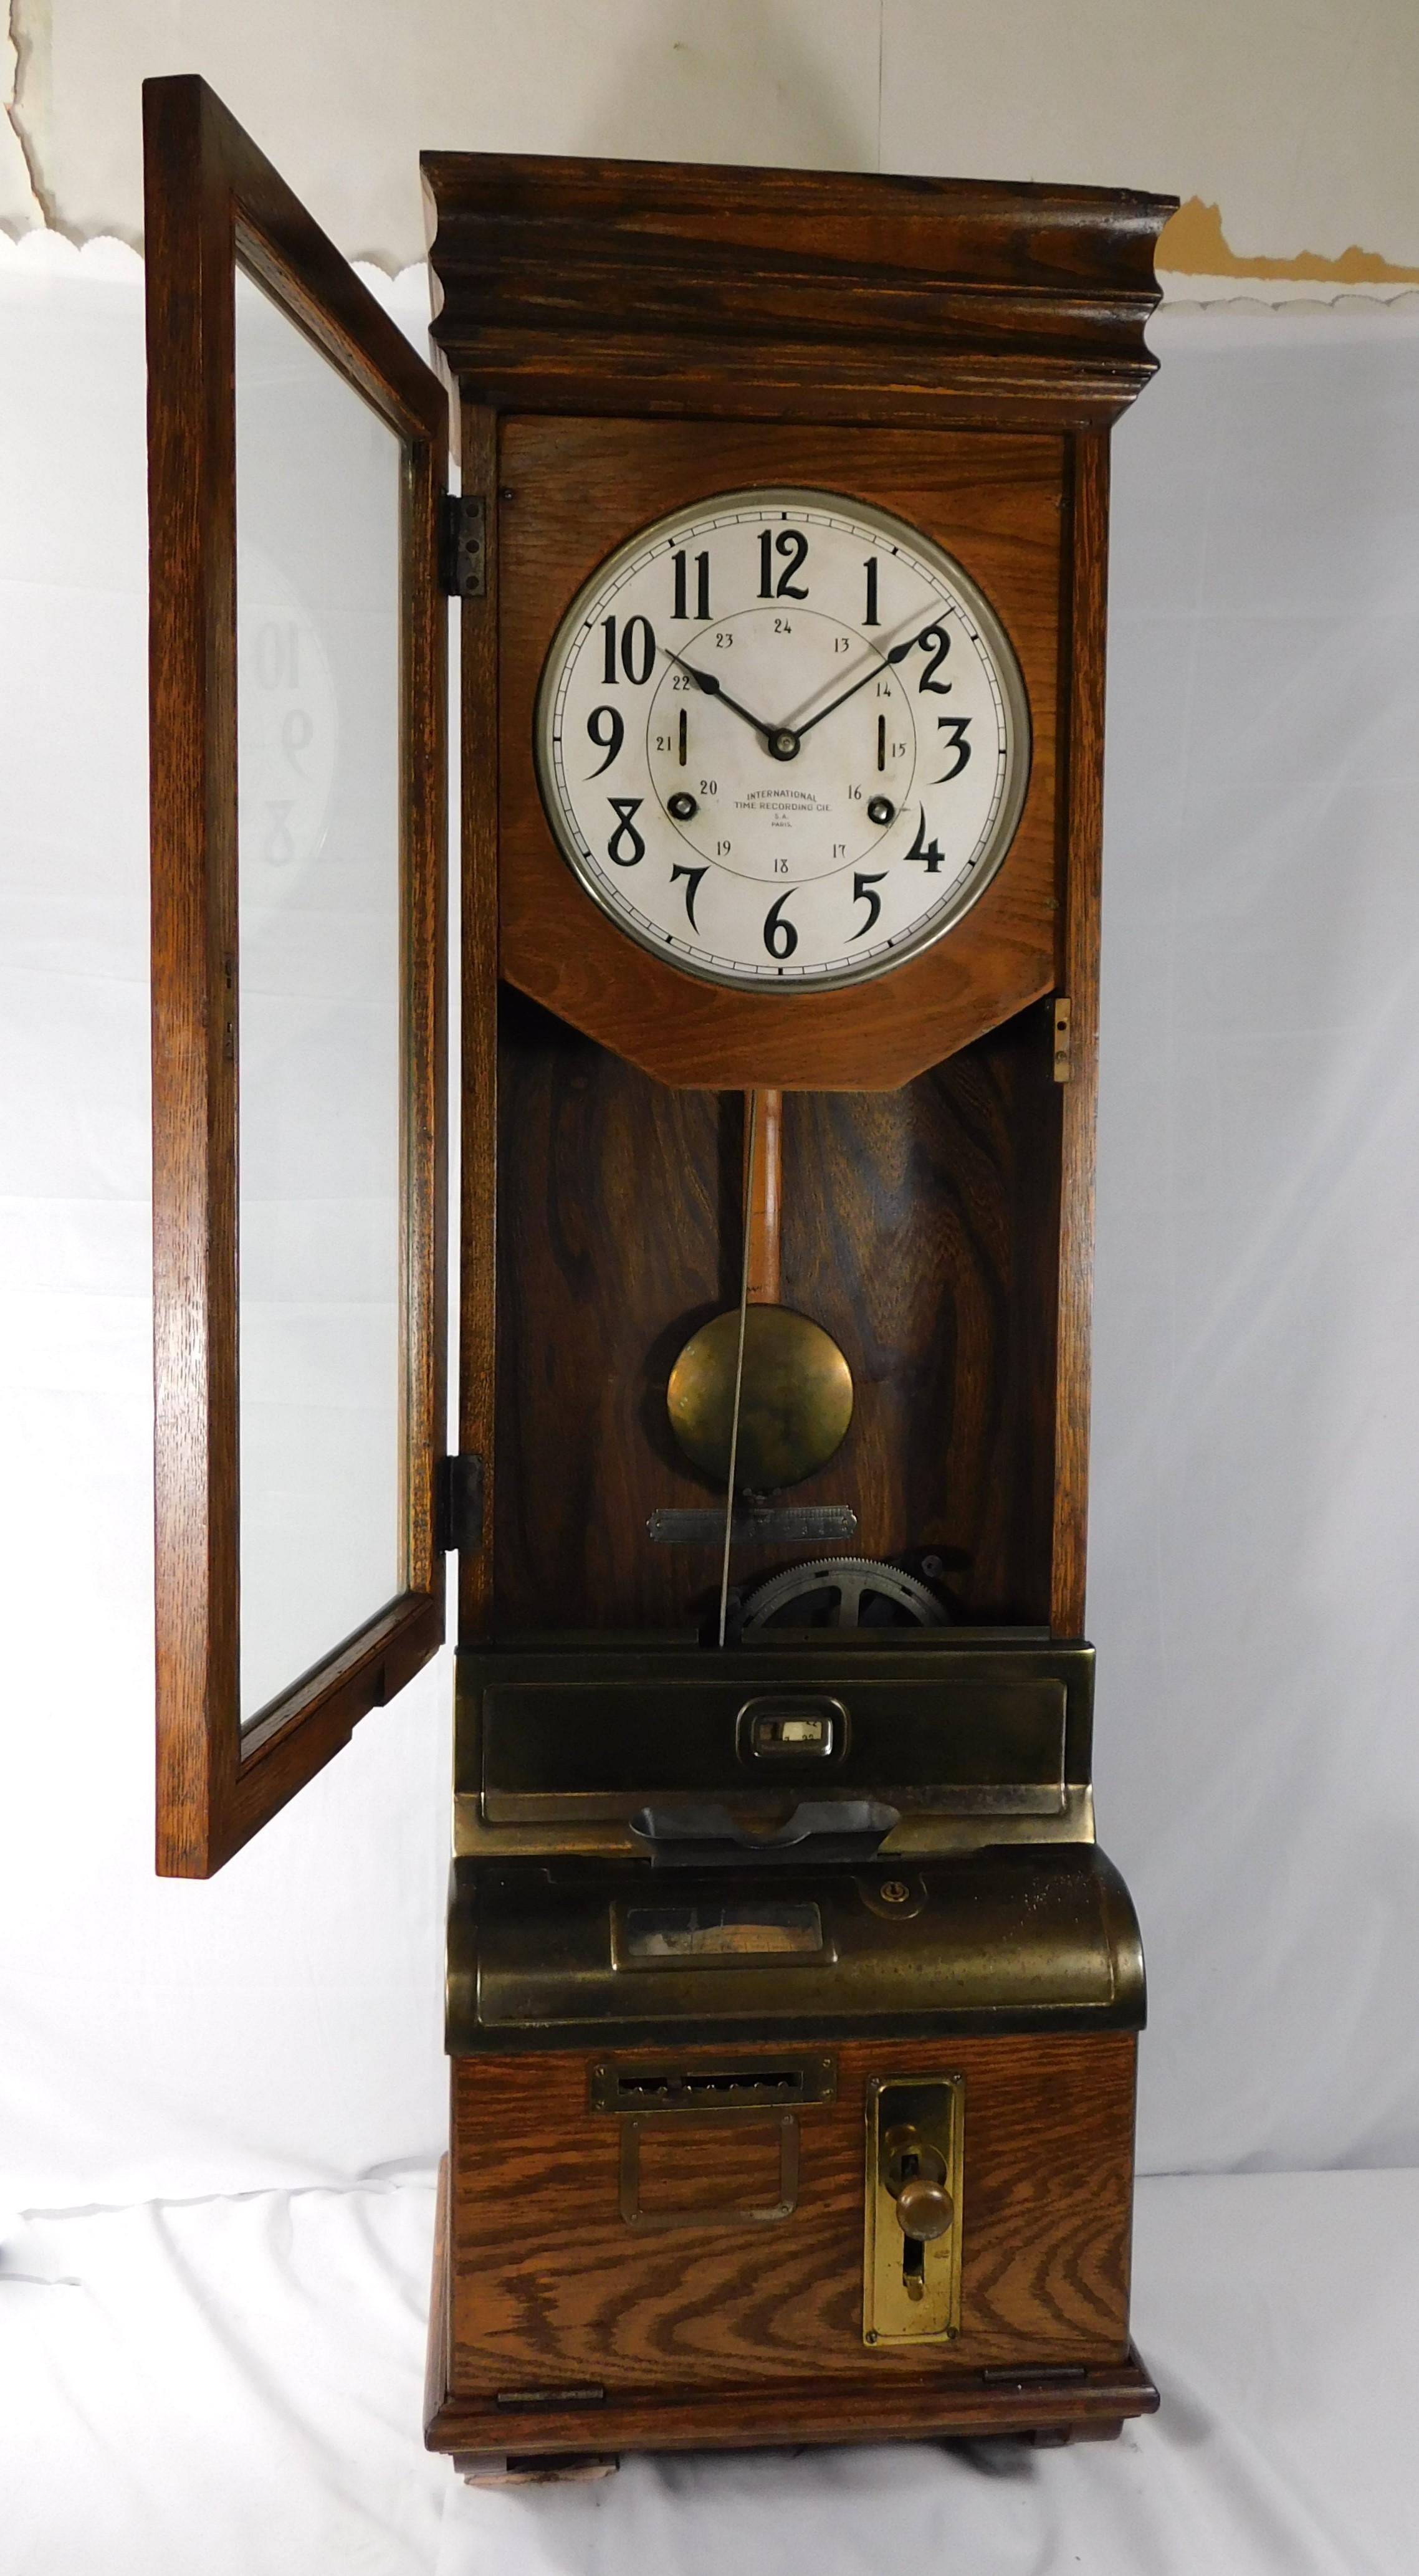 Clock face says International Time Recording CIE. S.A. Paris, industrial mechanical time card punch clock machine age Circa 1900 made in New York U.S.A. and exported to France. The oak case houses a rounded face with numerals in black. with brass